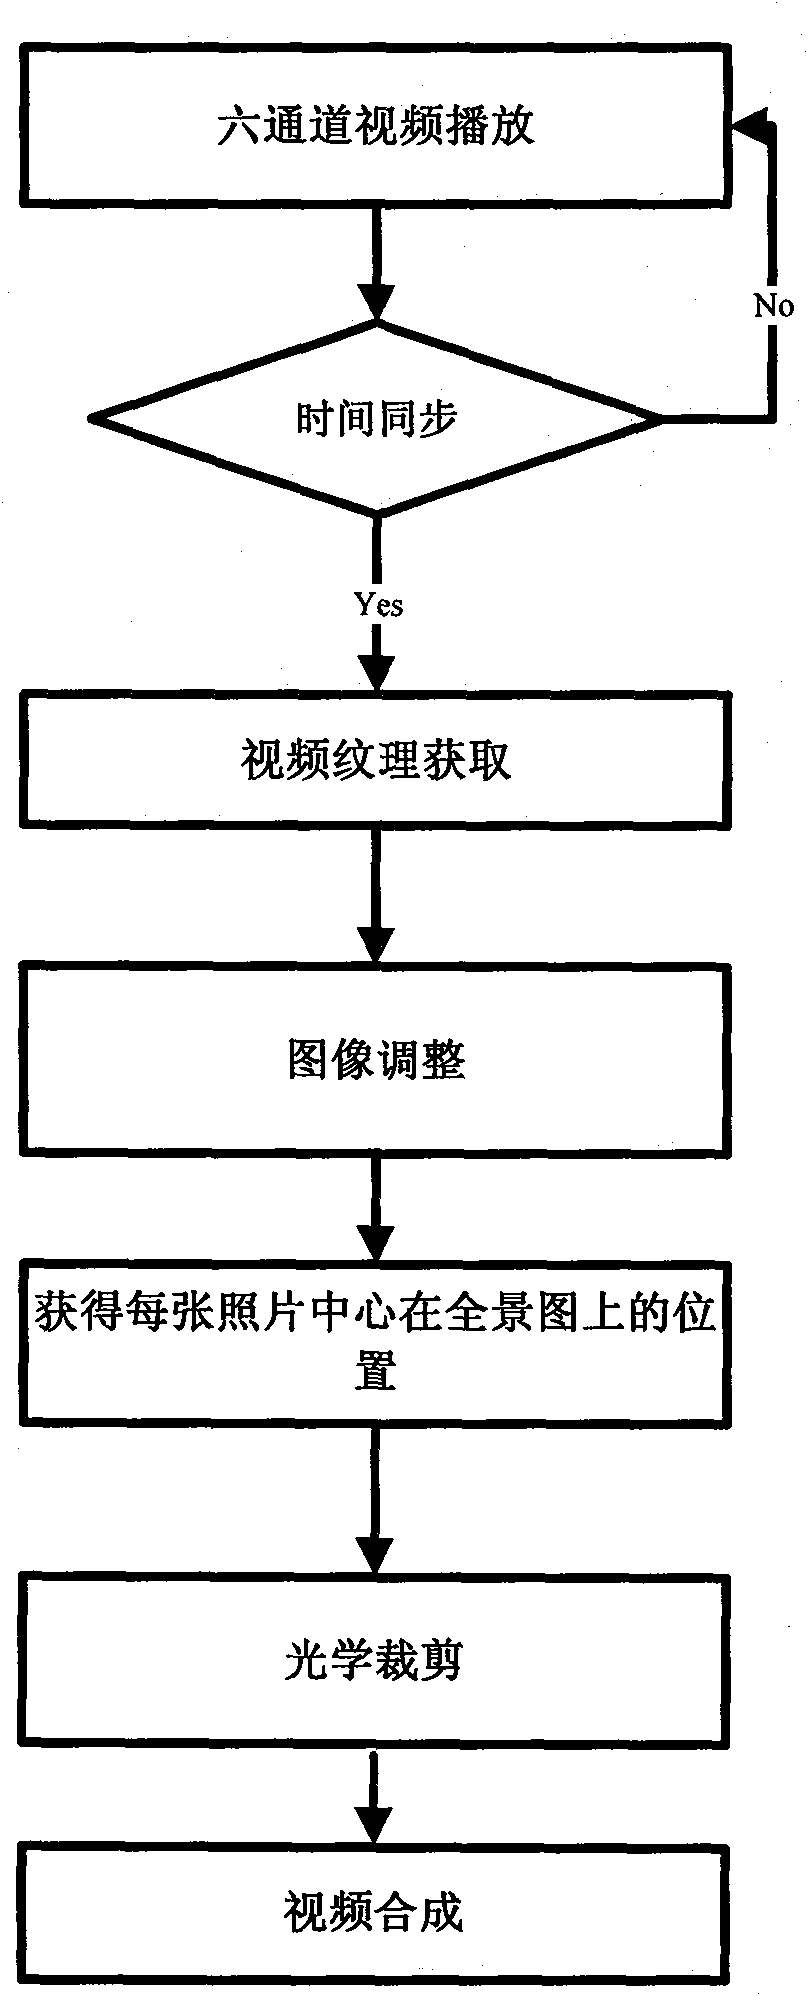 Method and system for generating three-dimensional panoramic continuous video through six-channel video source